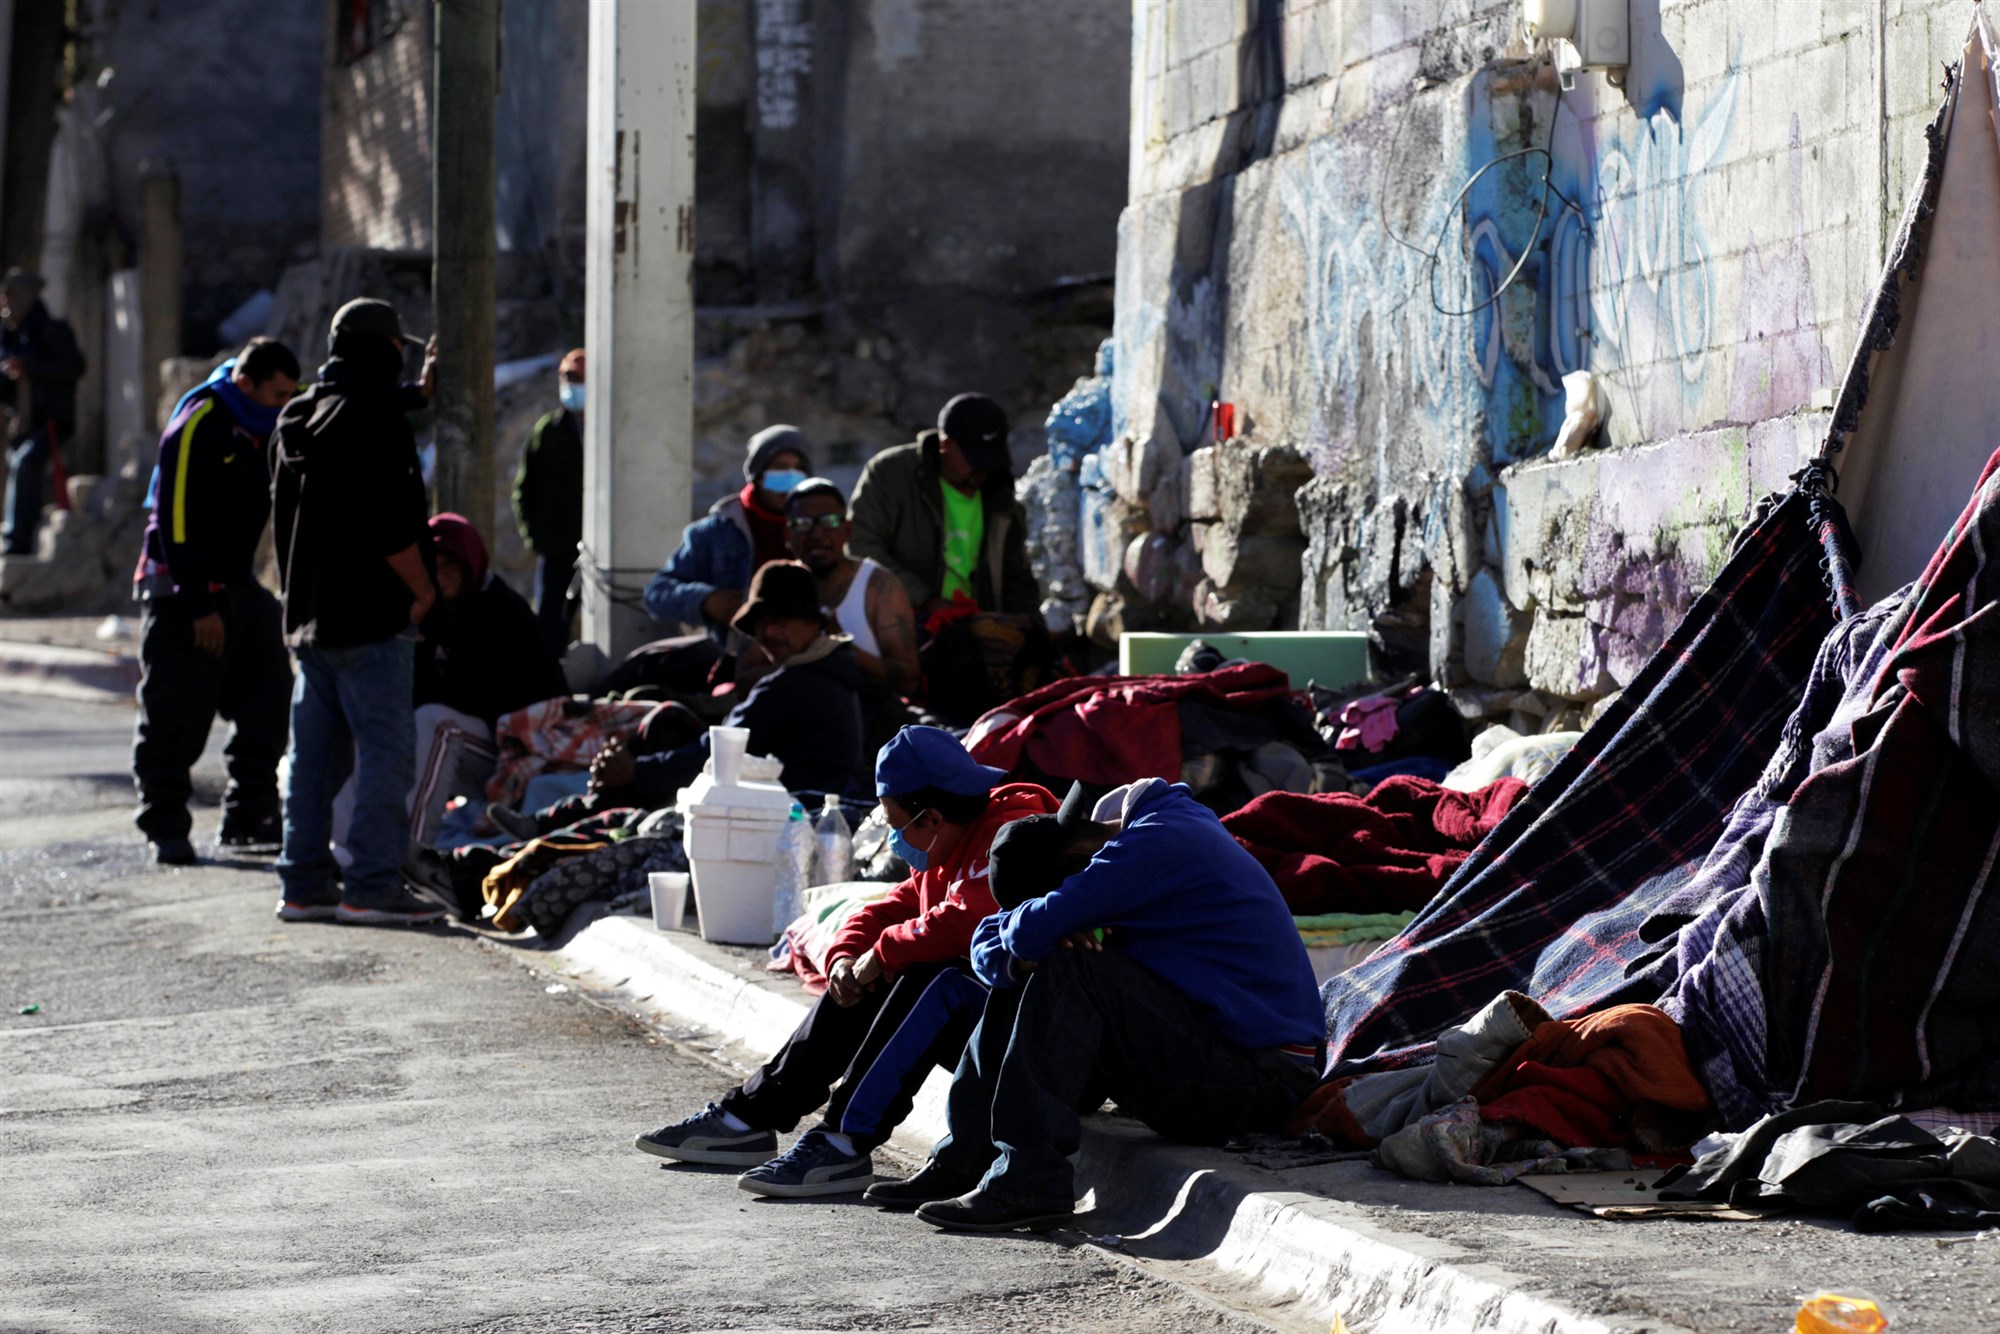 As Mexico closes migrant shelters due to coronavirus, those seeking refuge face more dangers